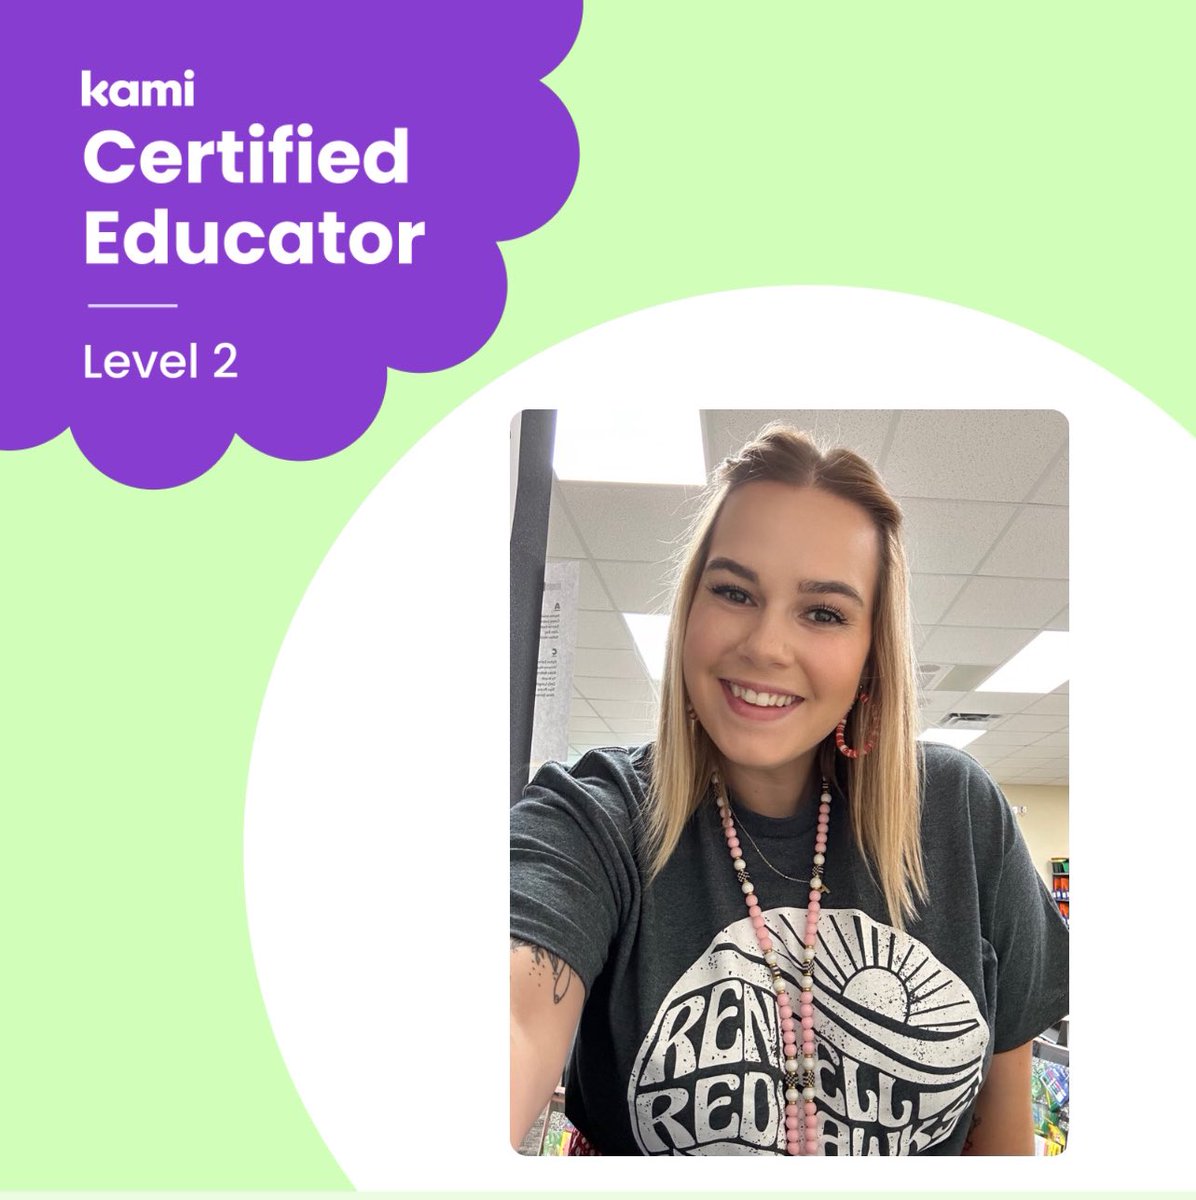 Well my girl @MsGauvin22 inspired me!!! Have really dove head first into @KamiApp this year and I love it!!! #Certified #WeAreRennell